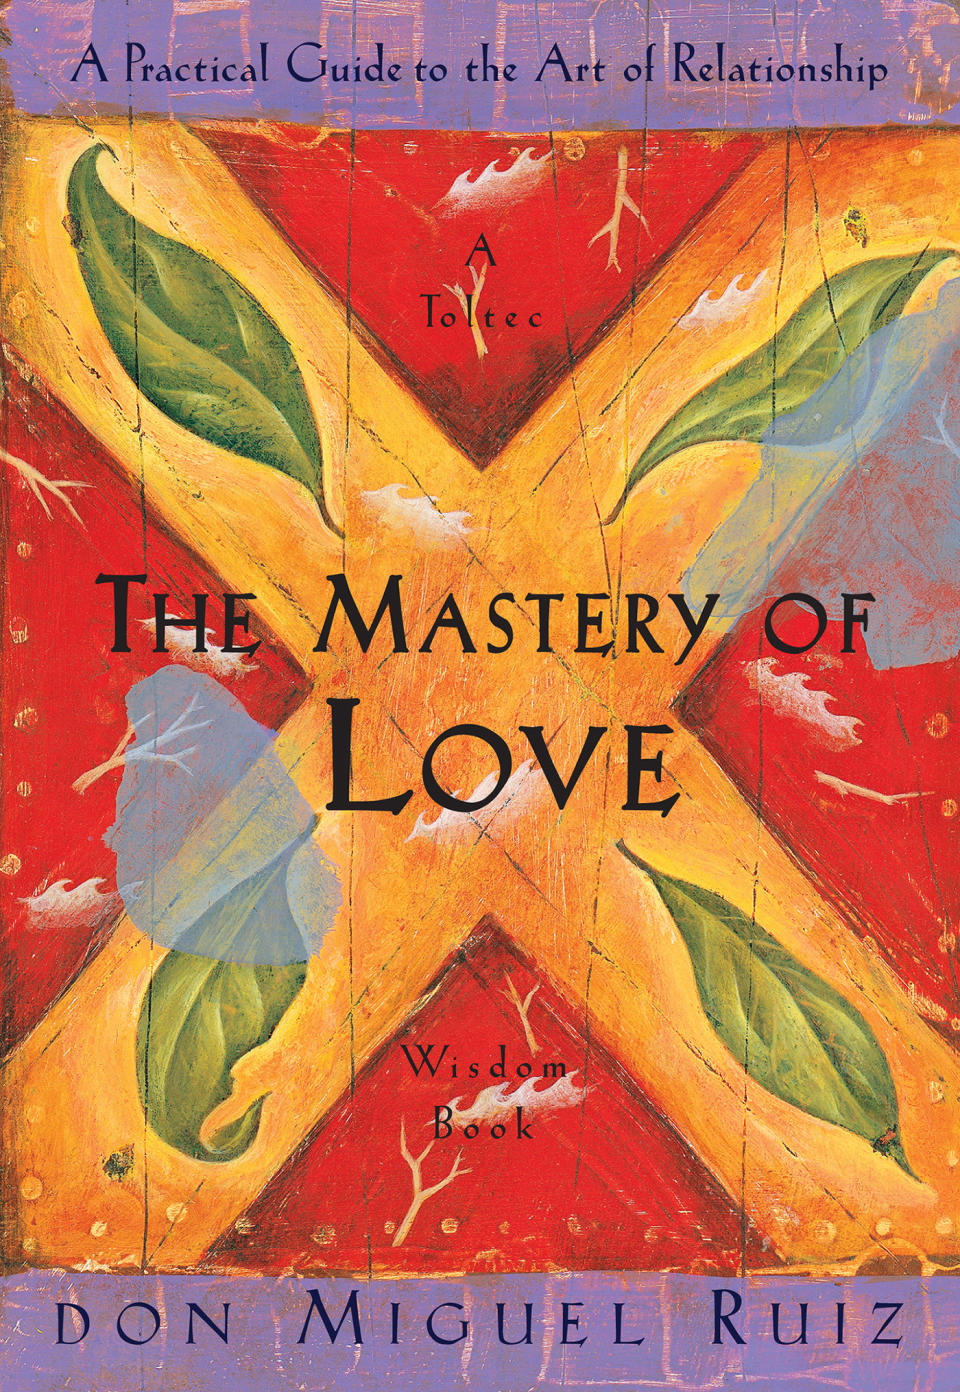 In The Mastery of Love, Don Miguel Ruiz shares insightful stories to help us recover from emotional wounds and help set us free from assumptions and fear-based beliefs. In this manner, we learn to restore the spirit of playfulness that is vital to loving relationships. The Mastery of Love is not just about love; there is awareness, awakening, and self-respect in every line of this book.